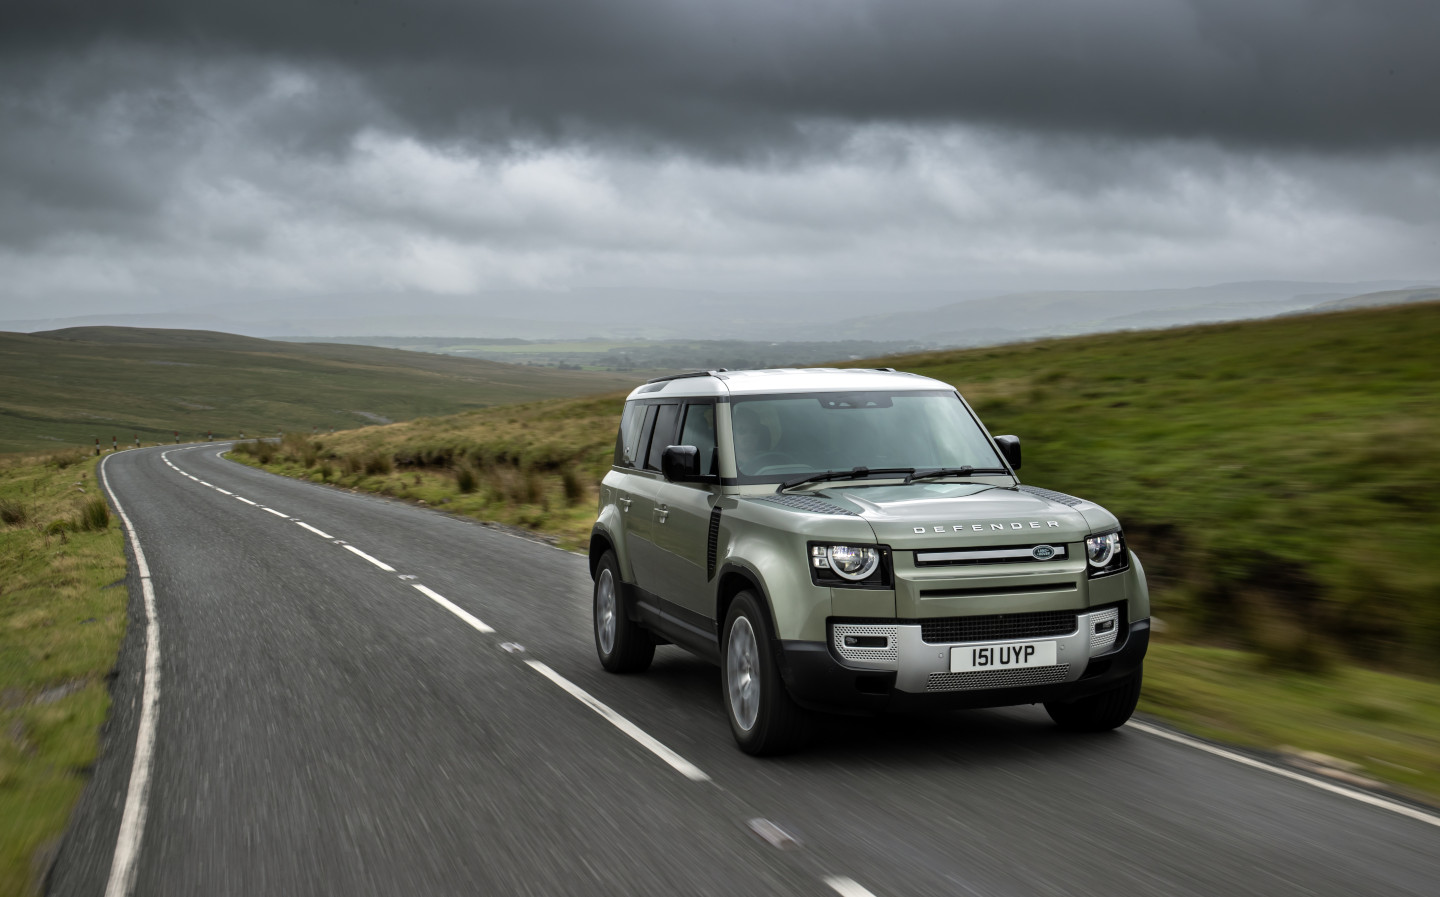 keyless theft, range rover, security, jlr offers free security upgrade to tackle high proportion of land rover thefts